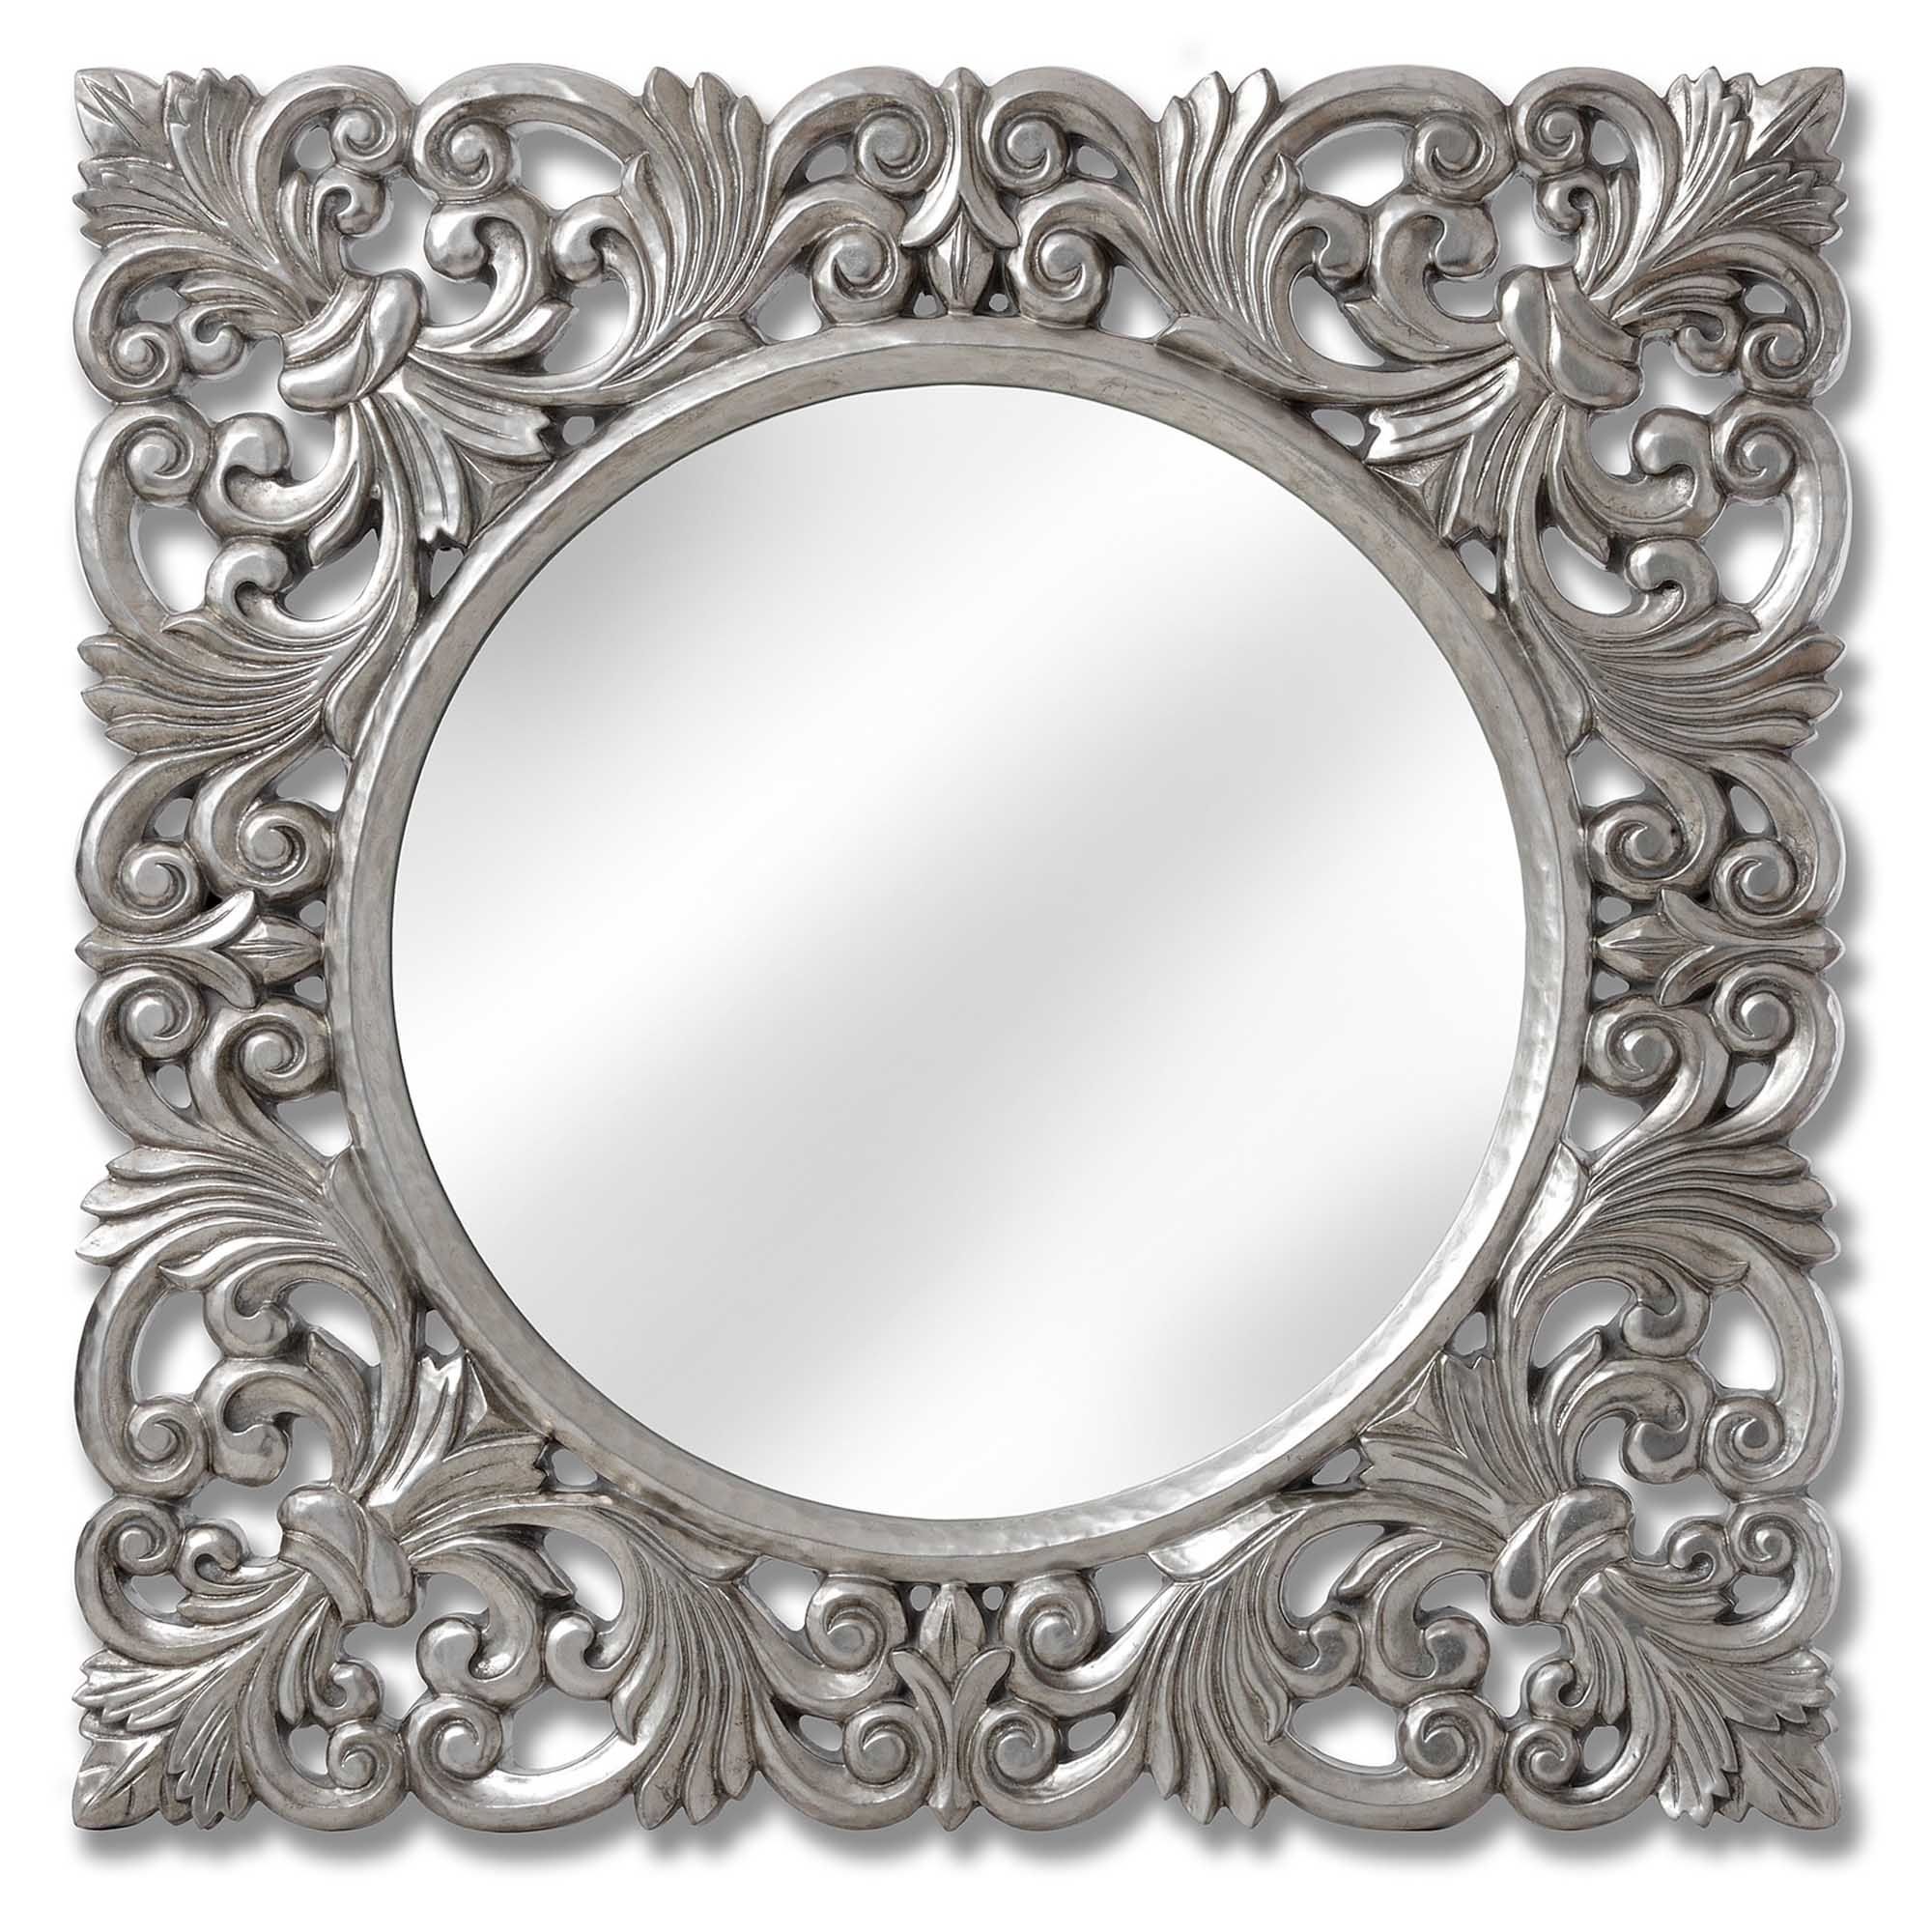 Baroque Antique French Style Silver Wall Mirror | Homesdirect365 Pertaining To Antiqued Glass Wall Mirrors (View 8 of 15)